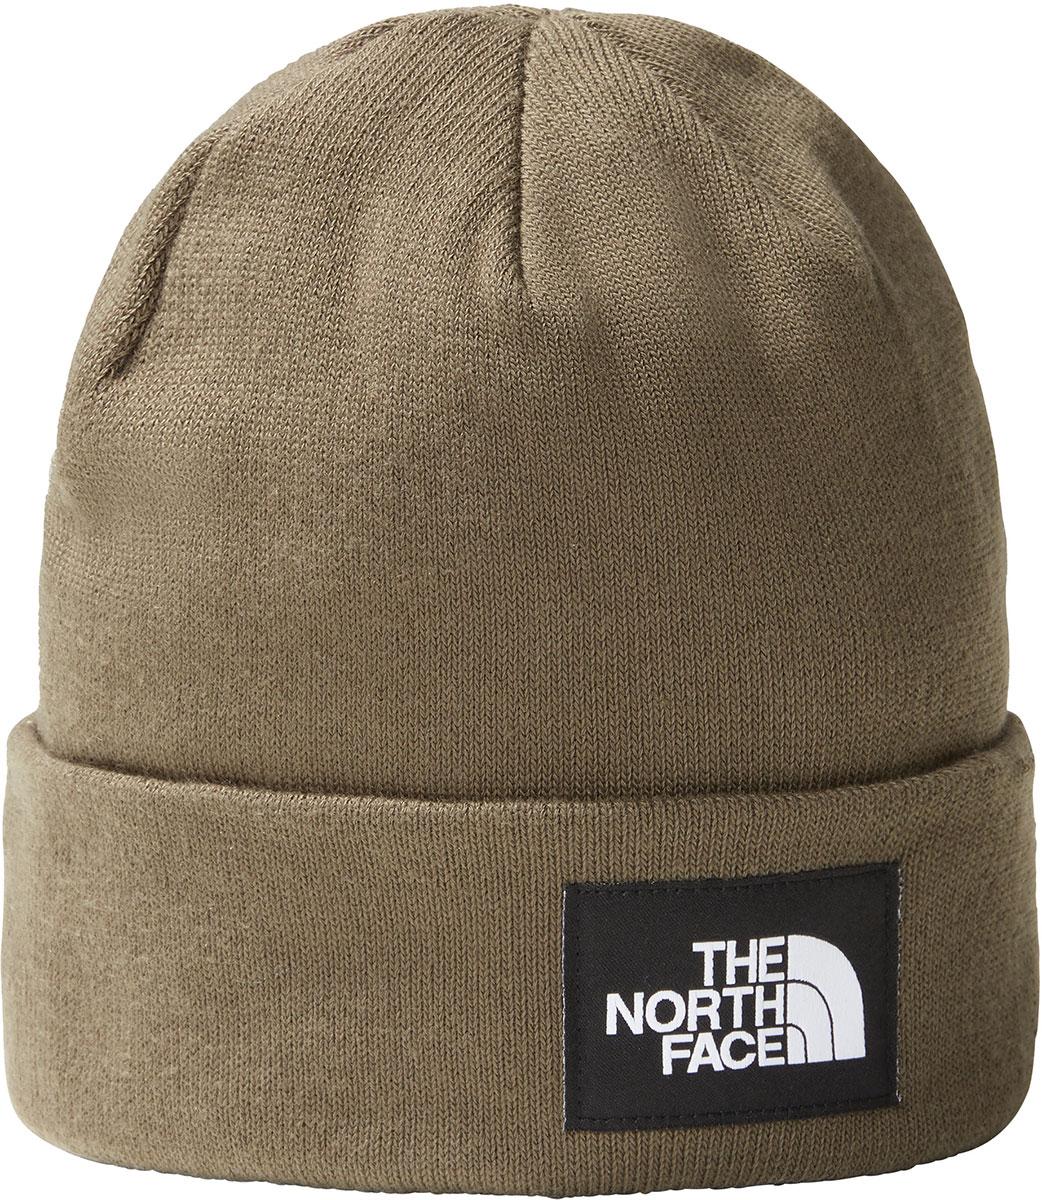 The North Face Dock Worker Recycled Beanie - New Taupe Green